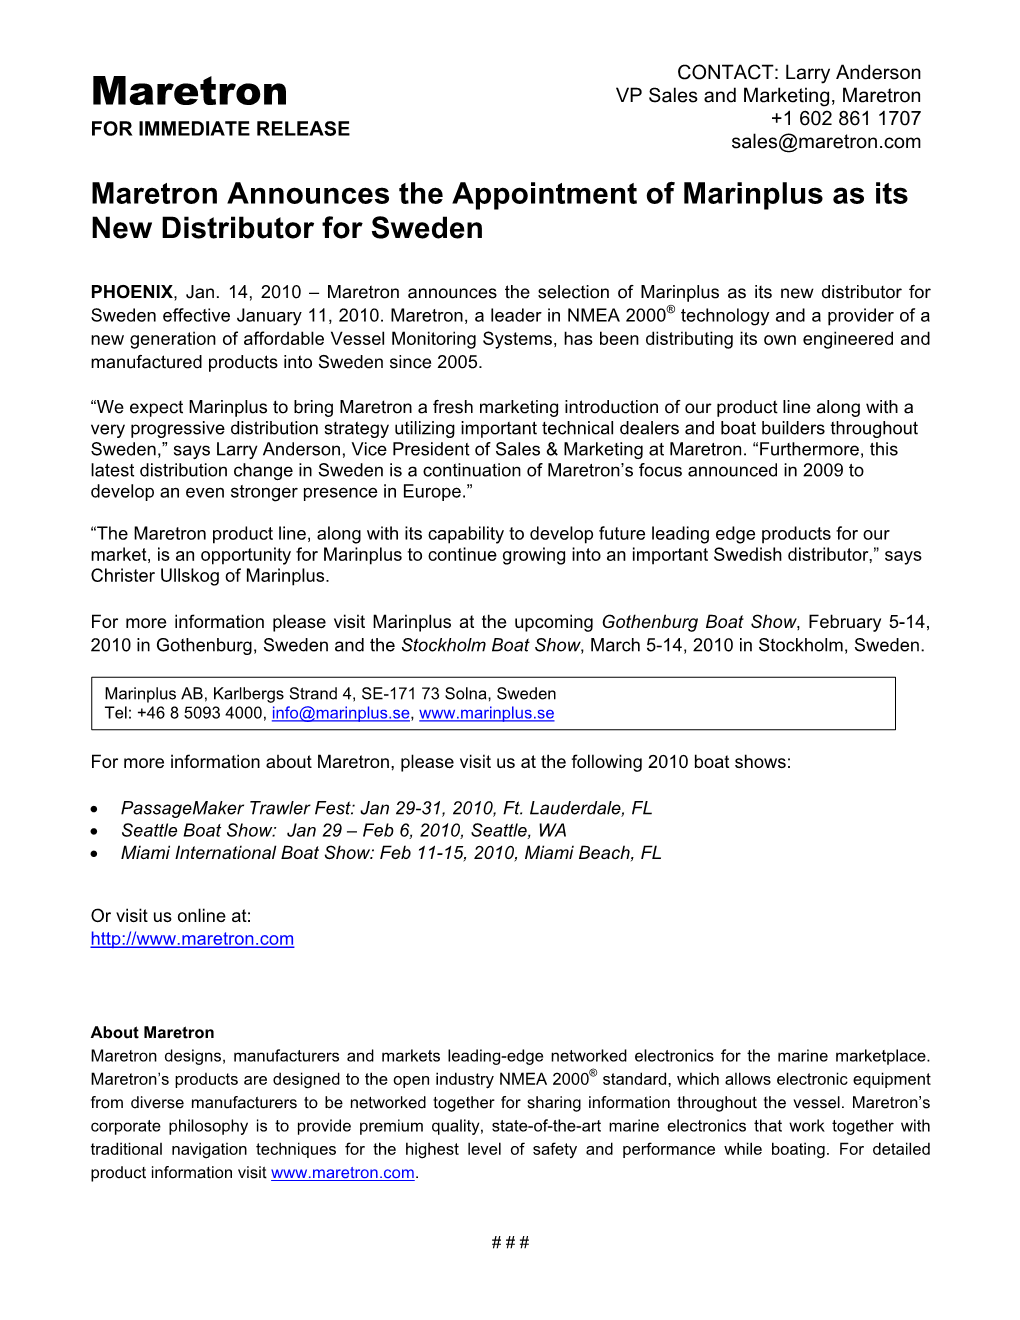 Maretron Announces the Appointment of Marinplus As Its New Distributor for Sweden